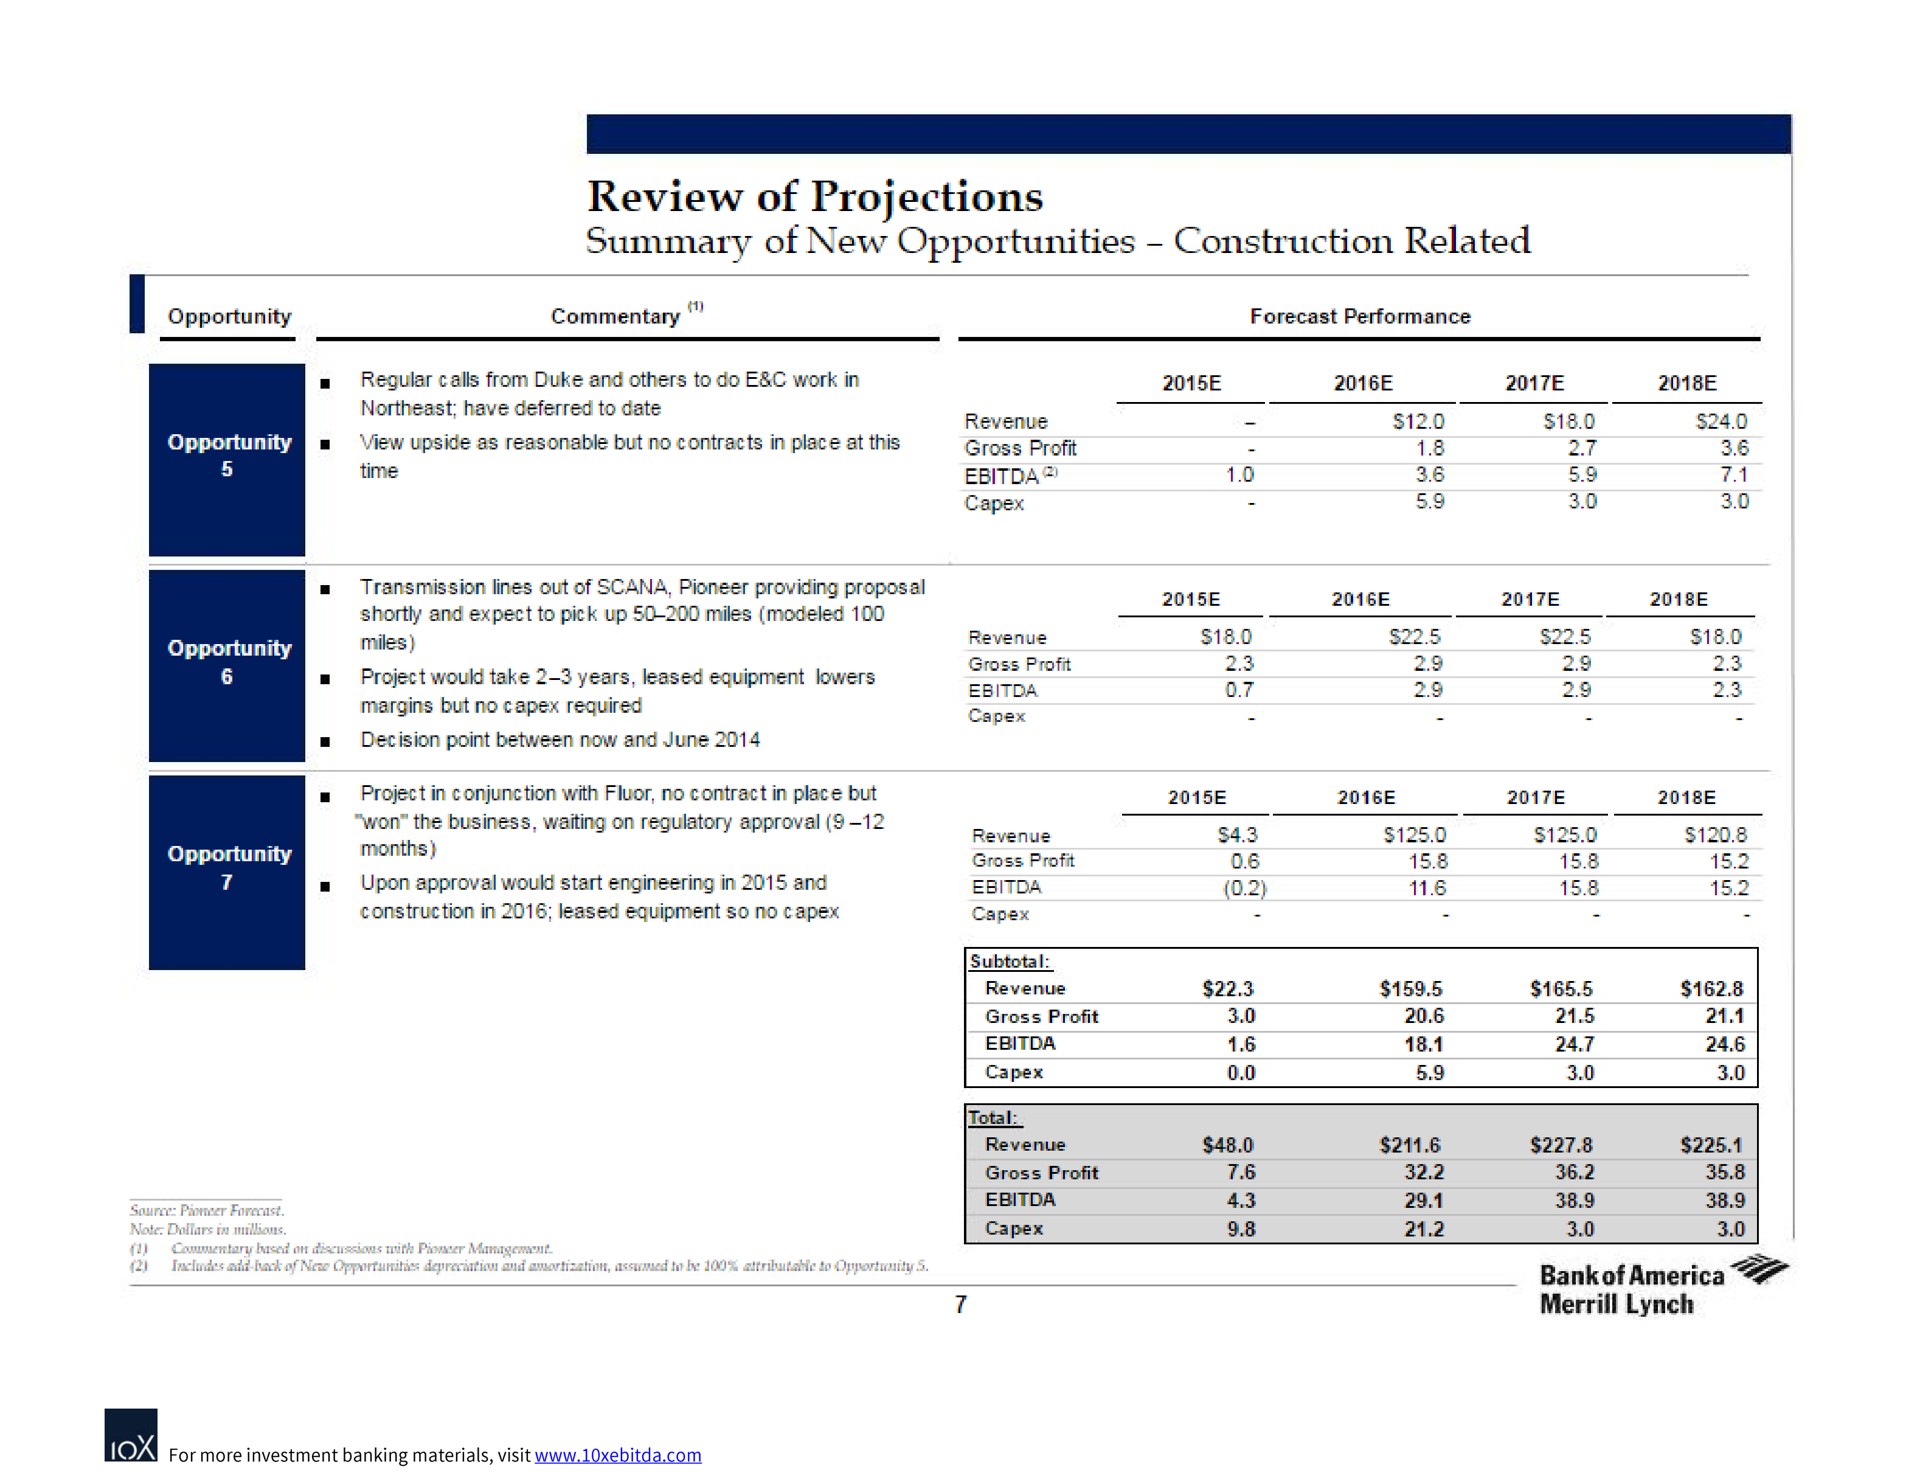 review of projections summary of new opportunities construction related | Bank of America